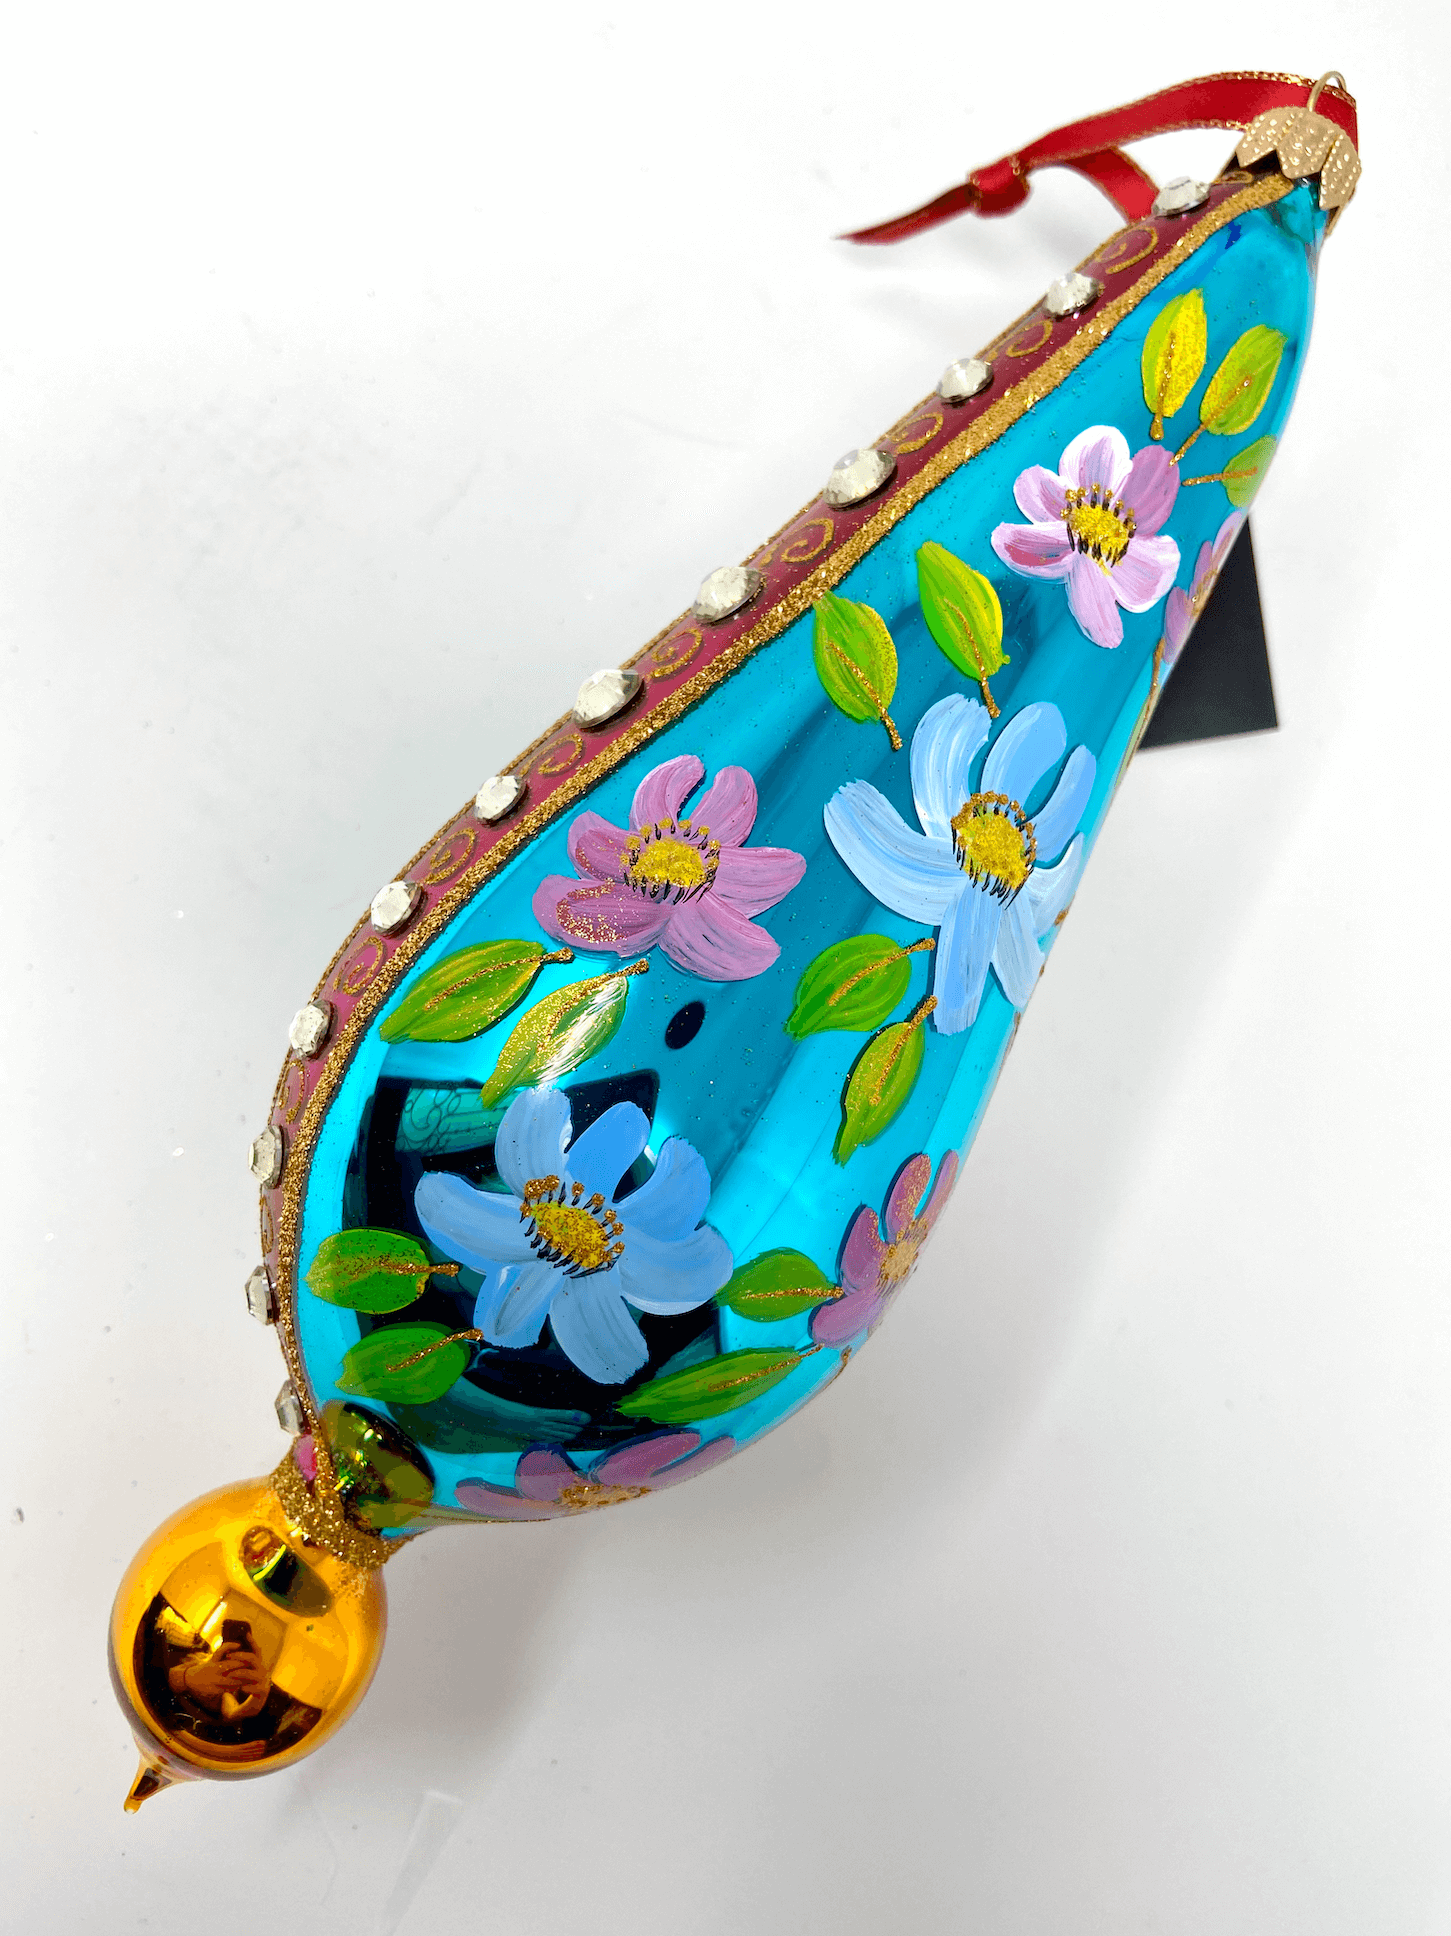 Extra large beautifully painted polish glass ornament with colorful accents. Features different colored daisies, a red stripe on an azure blue background dotted with gemstones and gold detailing.